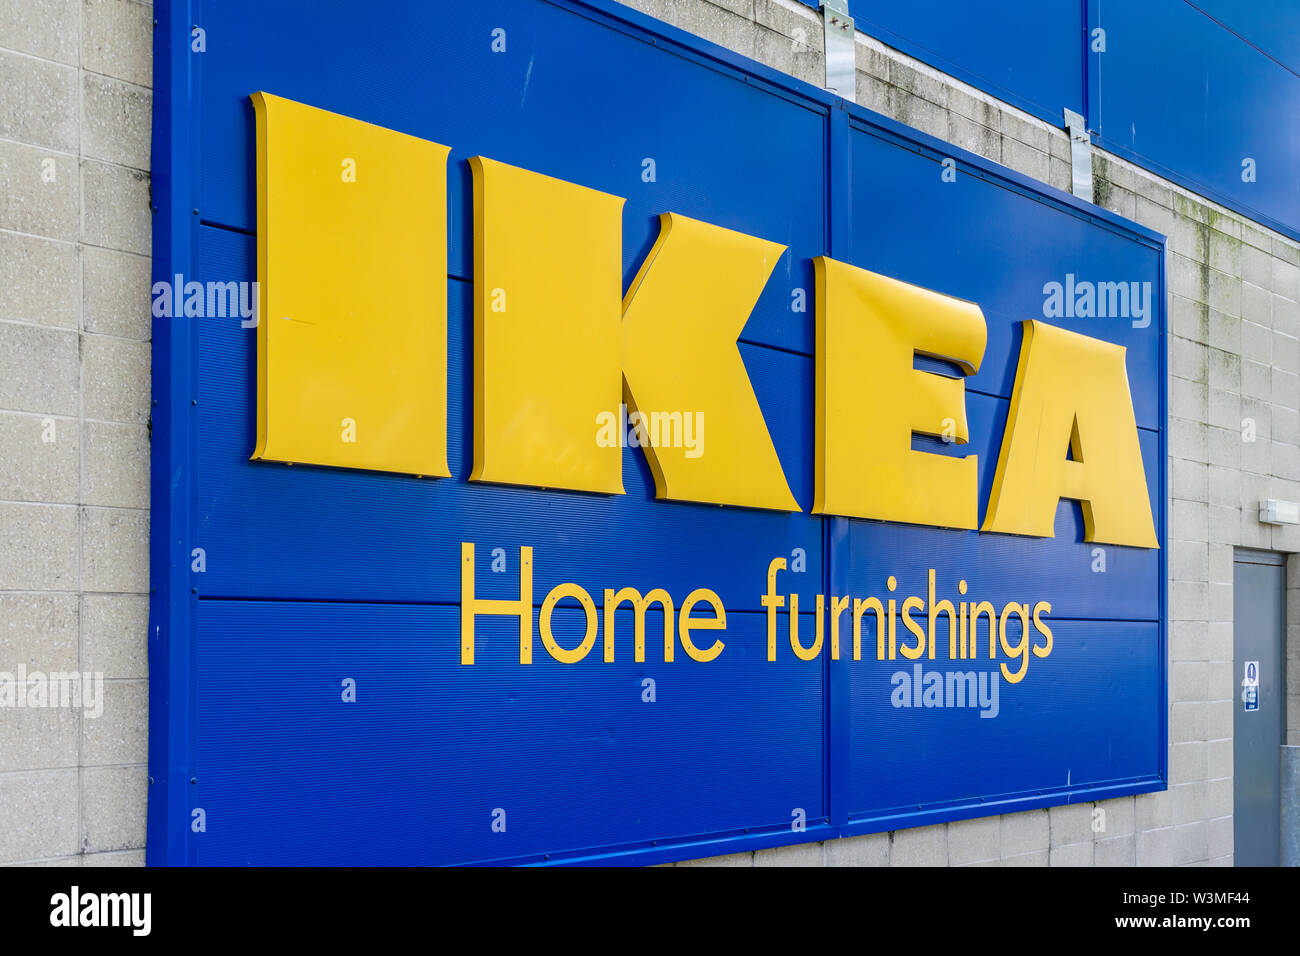 Blue and yellow IKEA Home furnishings sign outside an IKEA store in England, UK Stock Photo